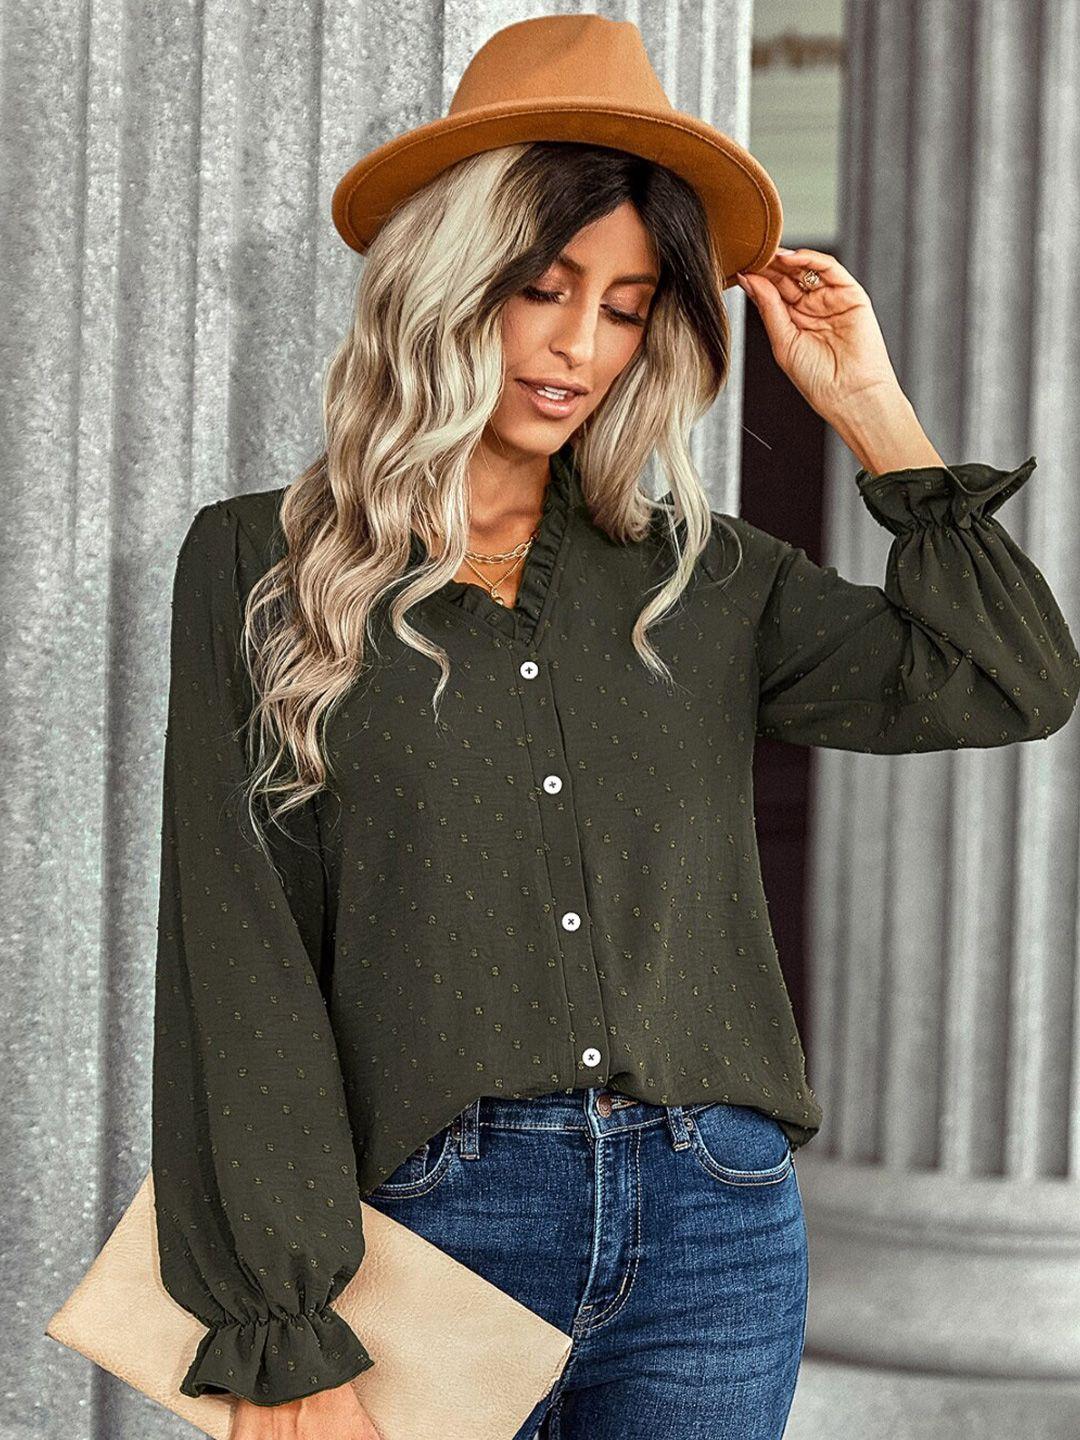 stylecast green self design bell sleeves shirt style top